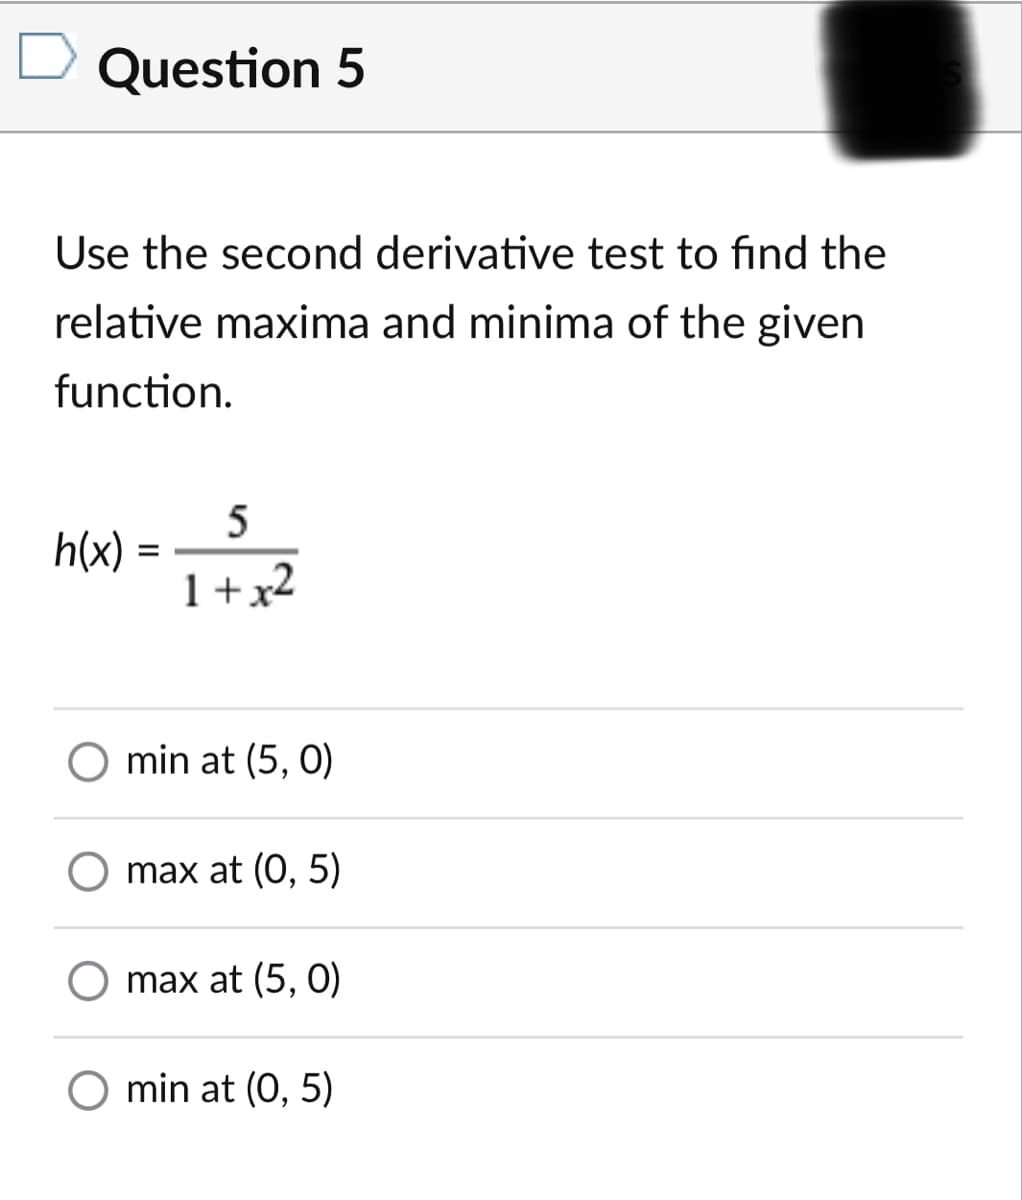 Question 5
Use the second derivative test to find the
relative maxima and minima of the given
function.
5
h(x)
1+x2
min at (5, 0)
O max at (0, 5)
max at (5, 0)
O min at (0, 5)
